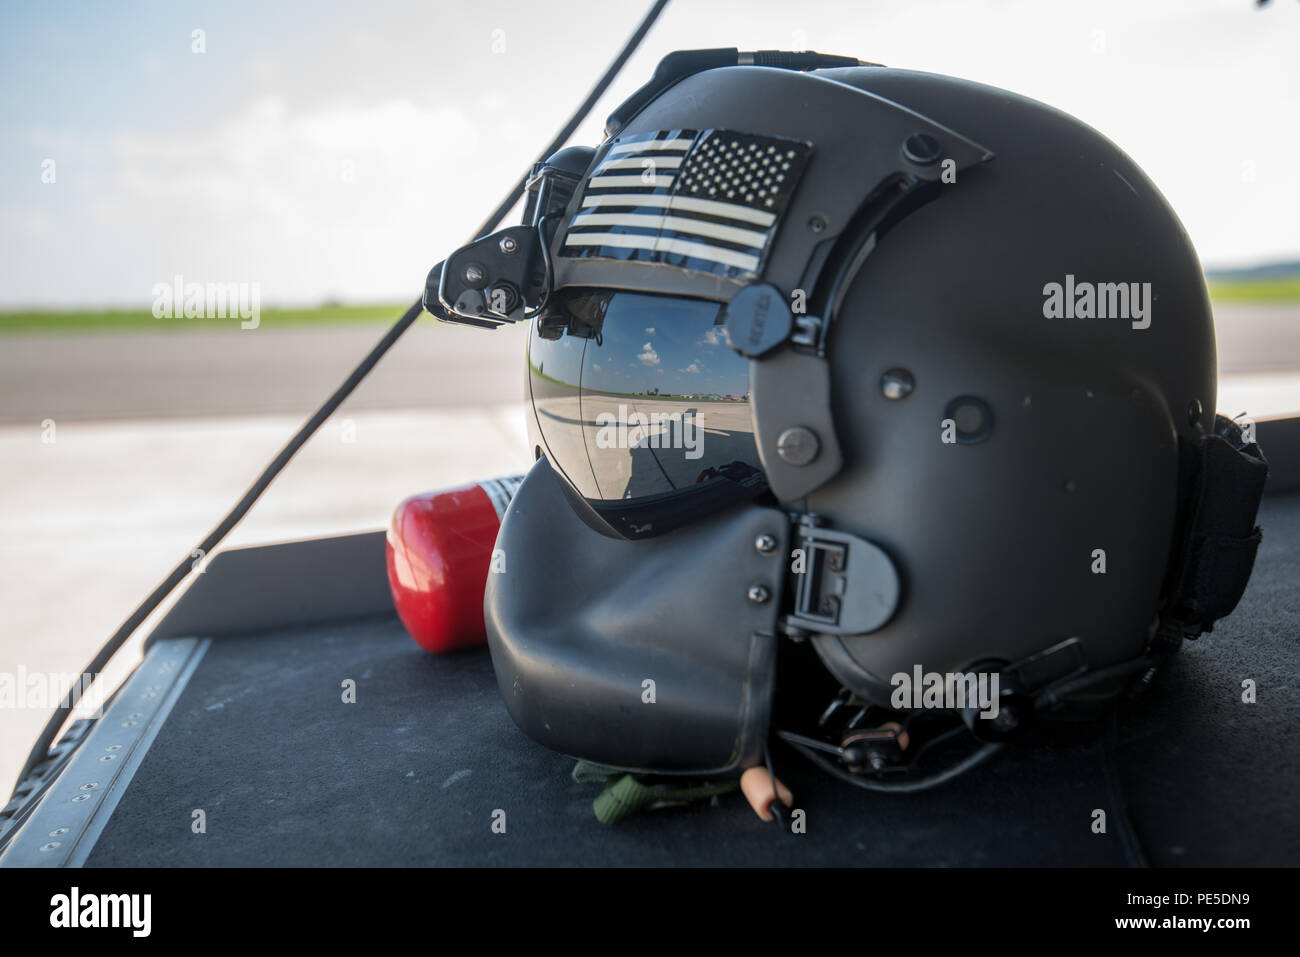 Close-up view of a U.S. Army HGU-56/P Aircrew Ballistic Helmet System, from a member of 1-214 General Support Aviation Battalion, 12th Combat Aviation Brigade, during a refueling stopover its CH-47F Chinook helicopter did in Chièvres, Belgium, Sept. 11, 2015. (U.S. Army photo by Visual Information Specialist Pierre-Etienne Courtejoie/Released) Stock Photo